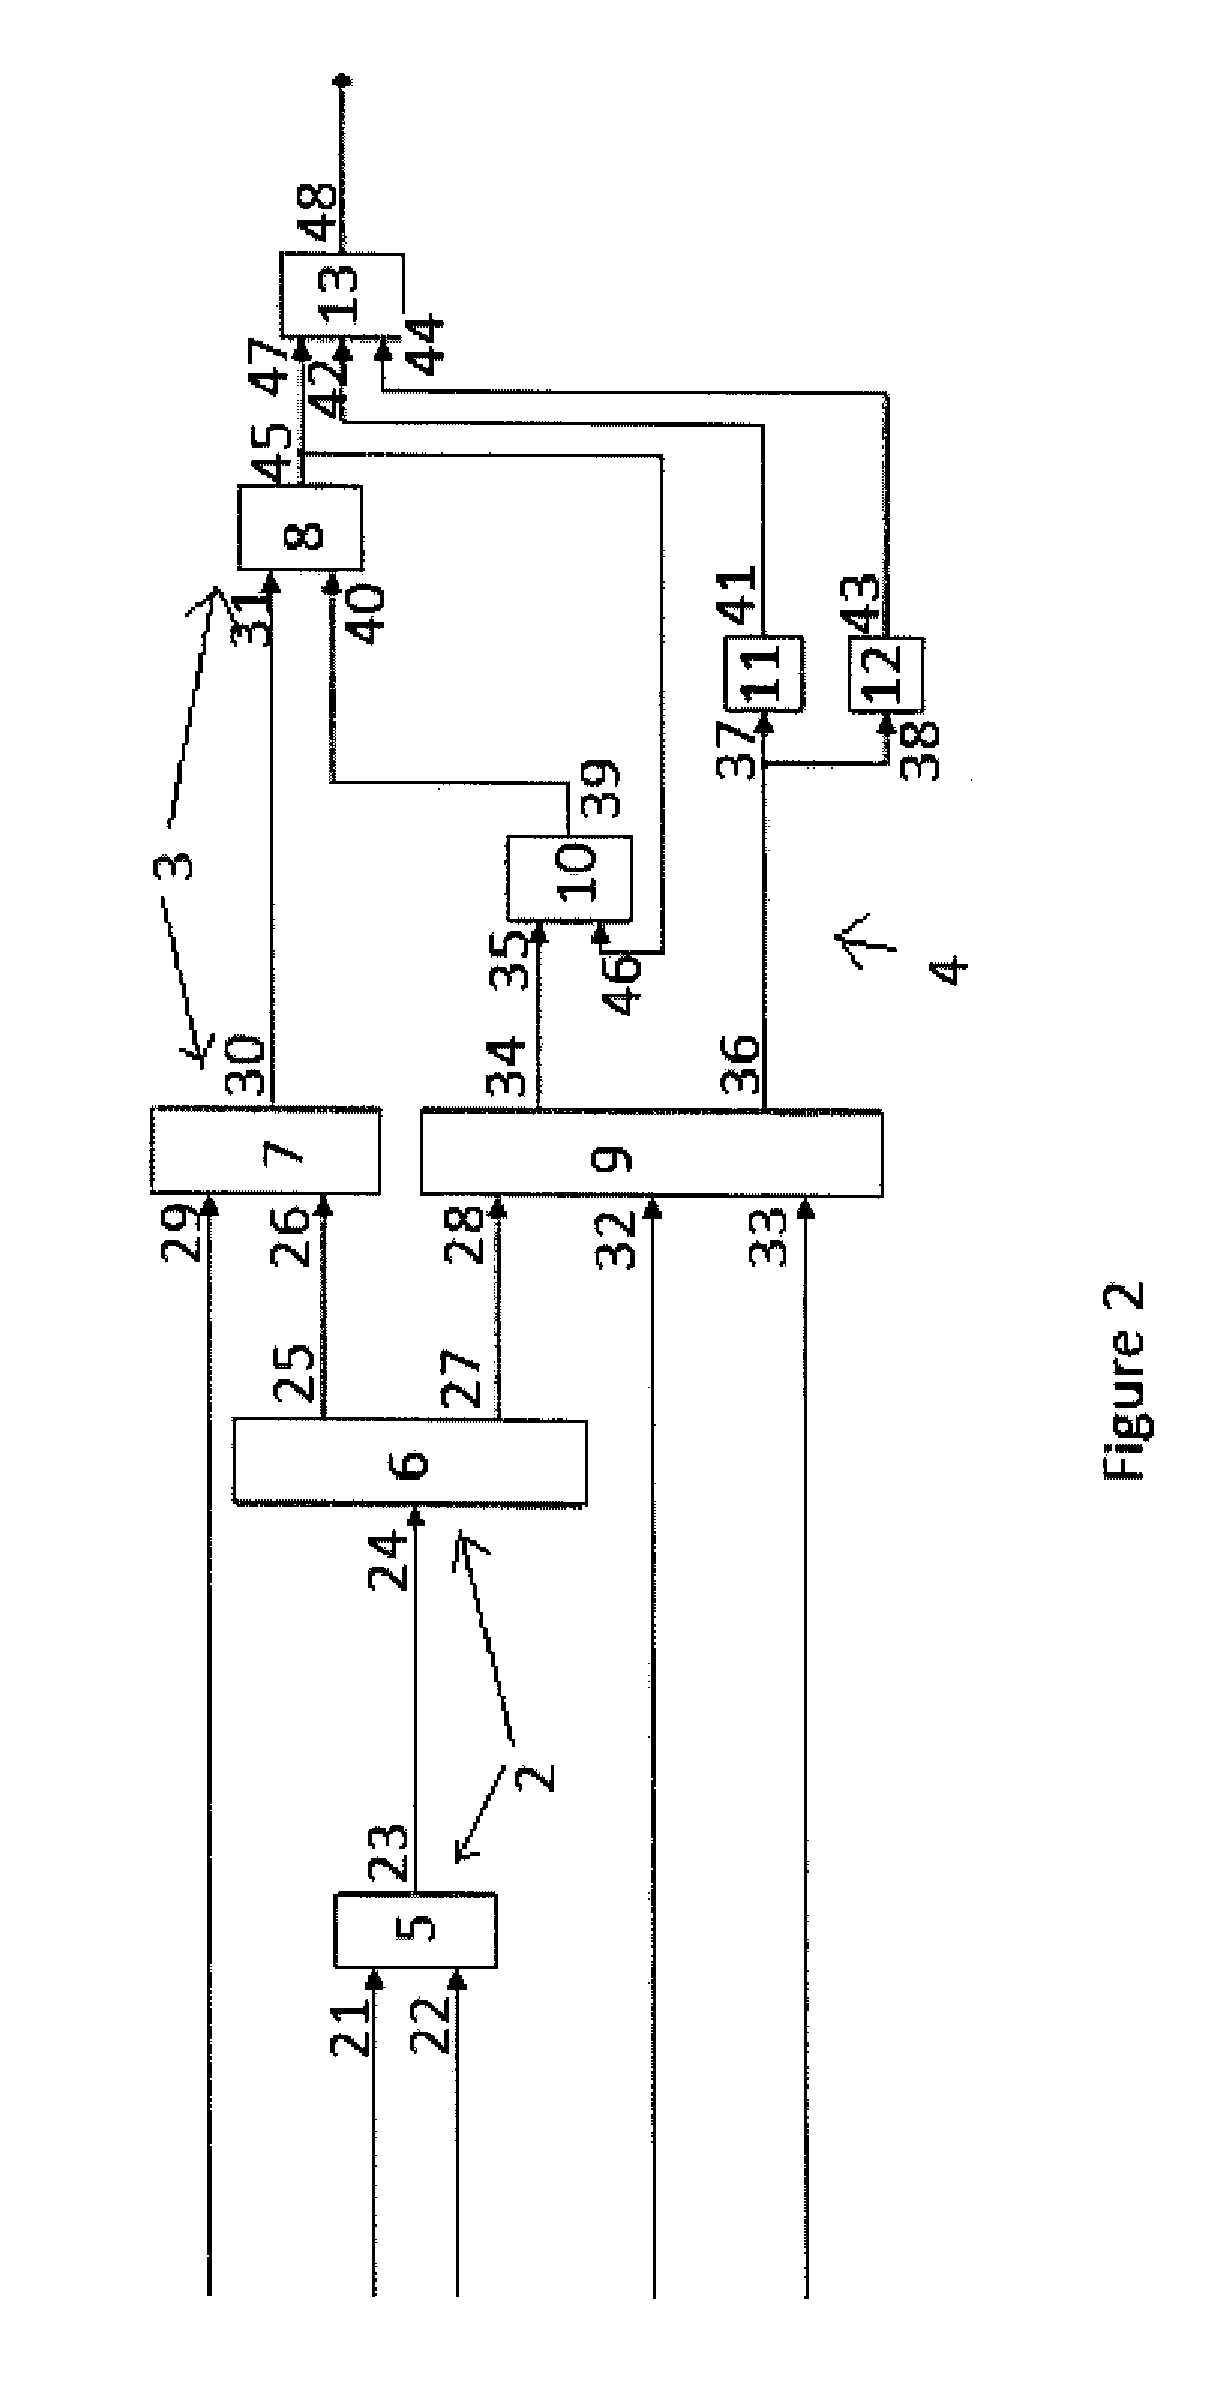 Method and system for fast tensor-vector multiplication